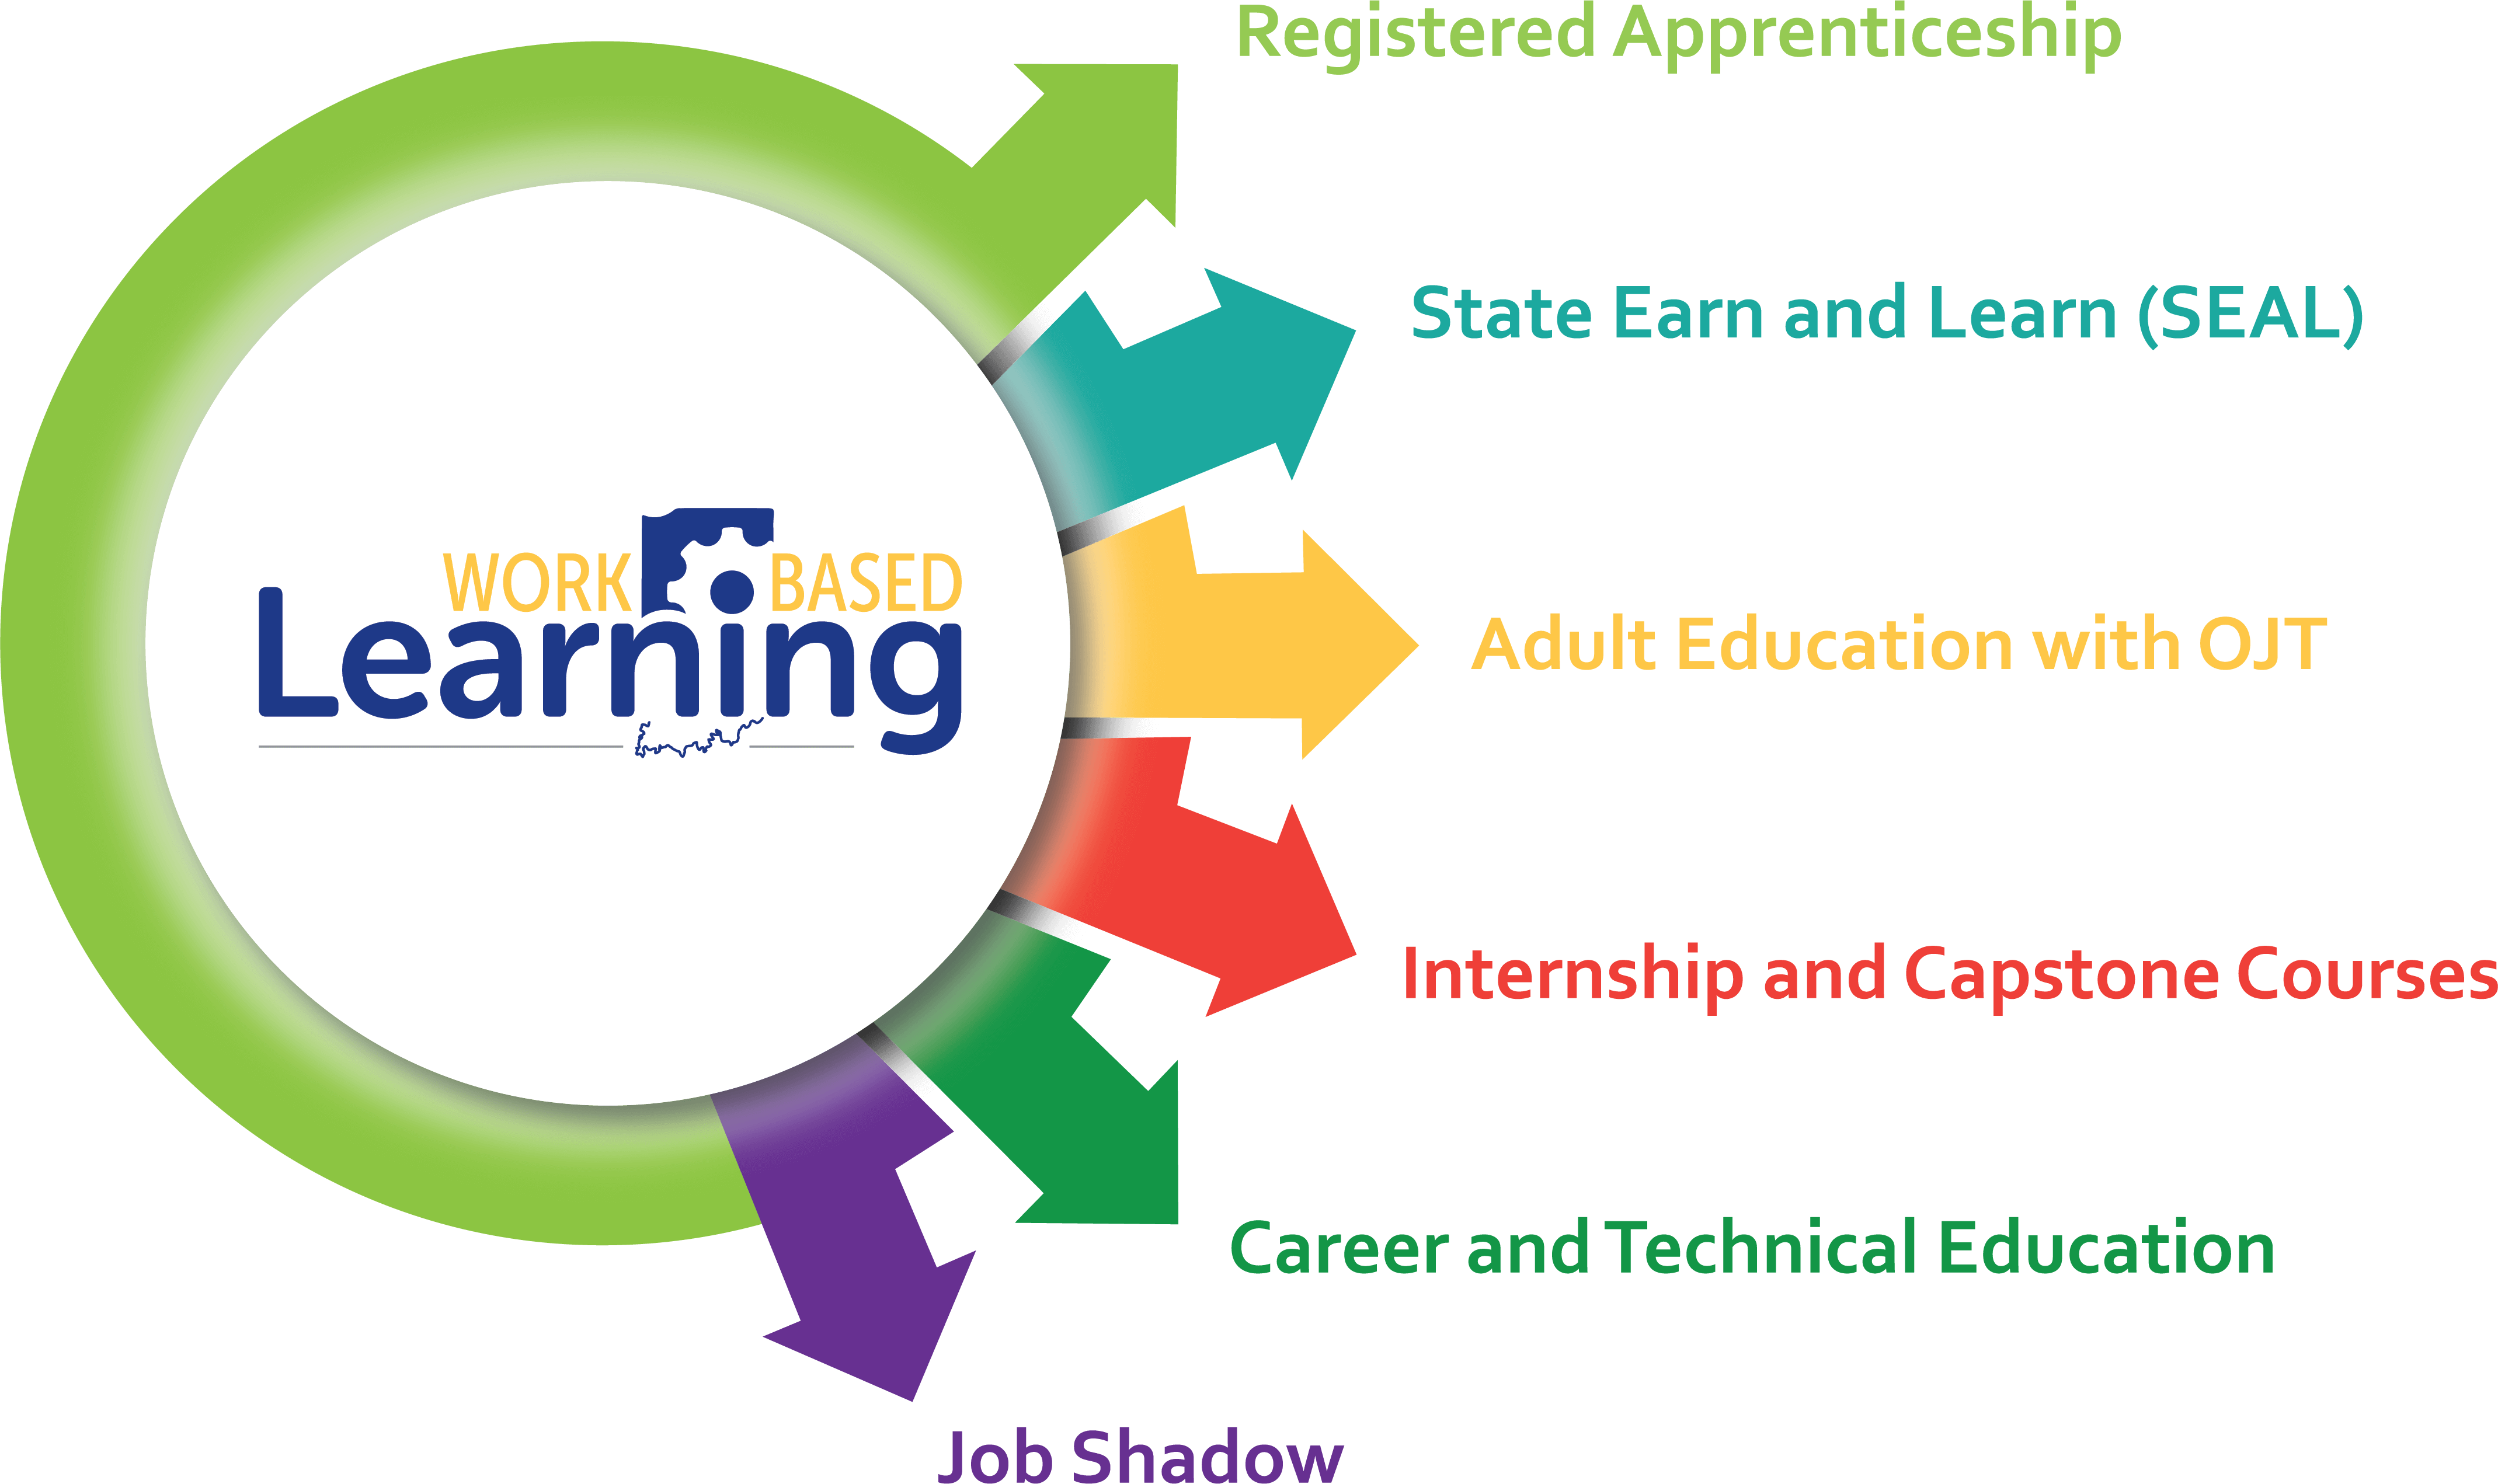 Pathways may include: U.S. DOL Registered Apprenticeship, State Earn and Learn (SEAL), Adult Education with On-the-Job Training, Internship and Capstone Courses, Career and Technical Education, and Job Shadowing Opportunities